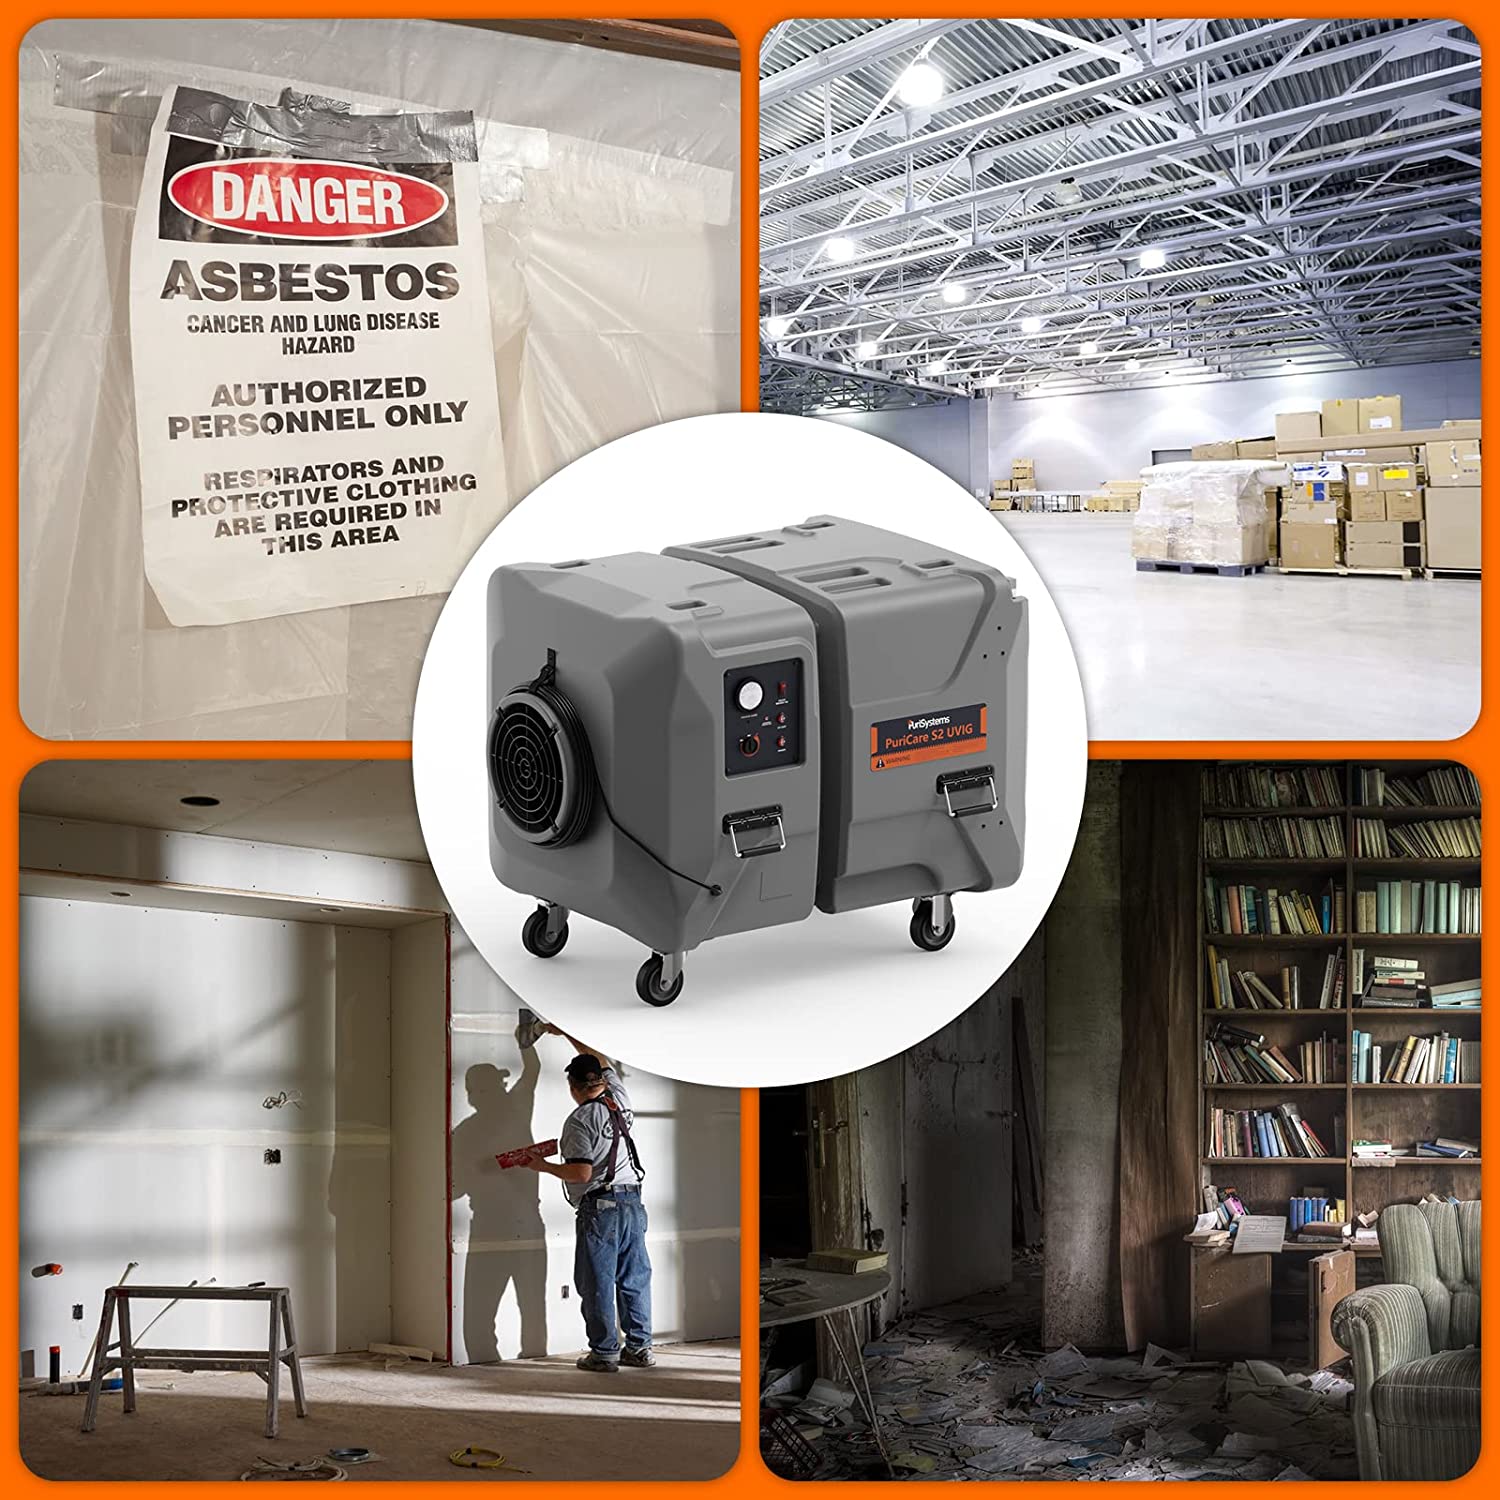 Purisystems Puricare S2 UVIG 2000 CFM Industrial Air Filtration System, 4 Stage Commercial Air Scrubber, Buit-in UV-C Light & Ionizer for Water/Fire Damage Restoration, Renovation, Construction Use